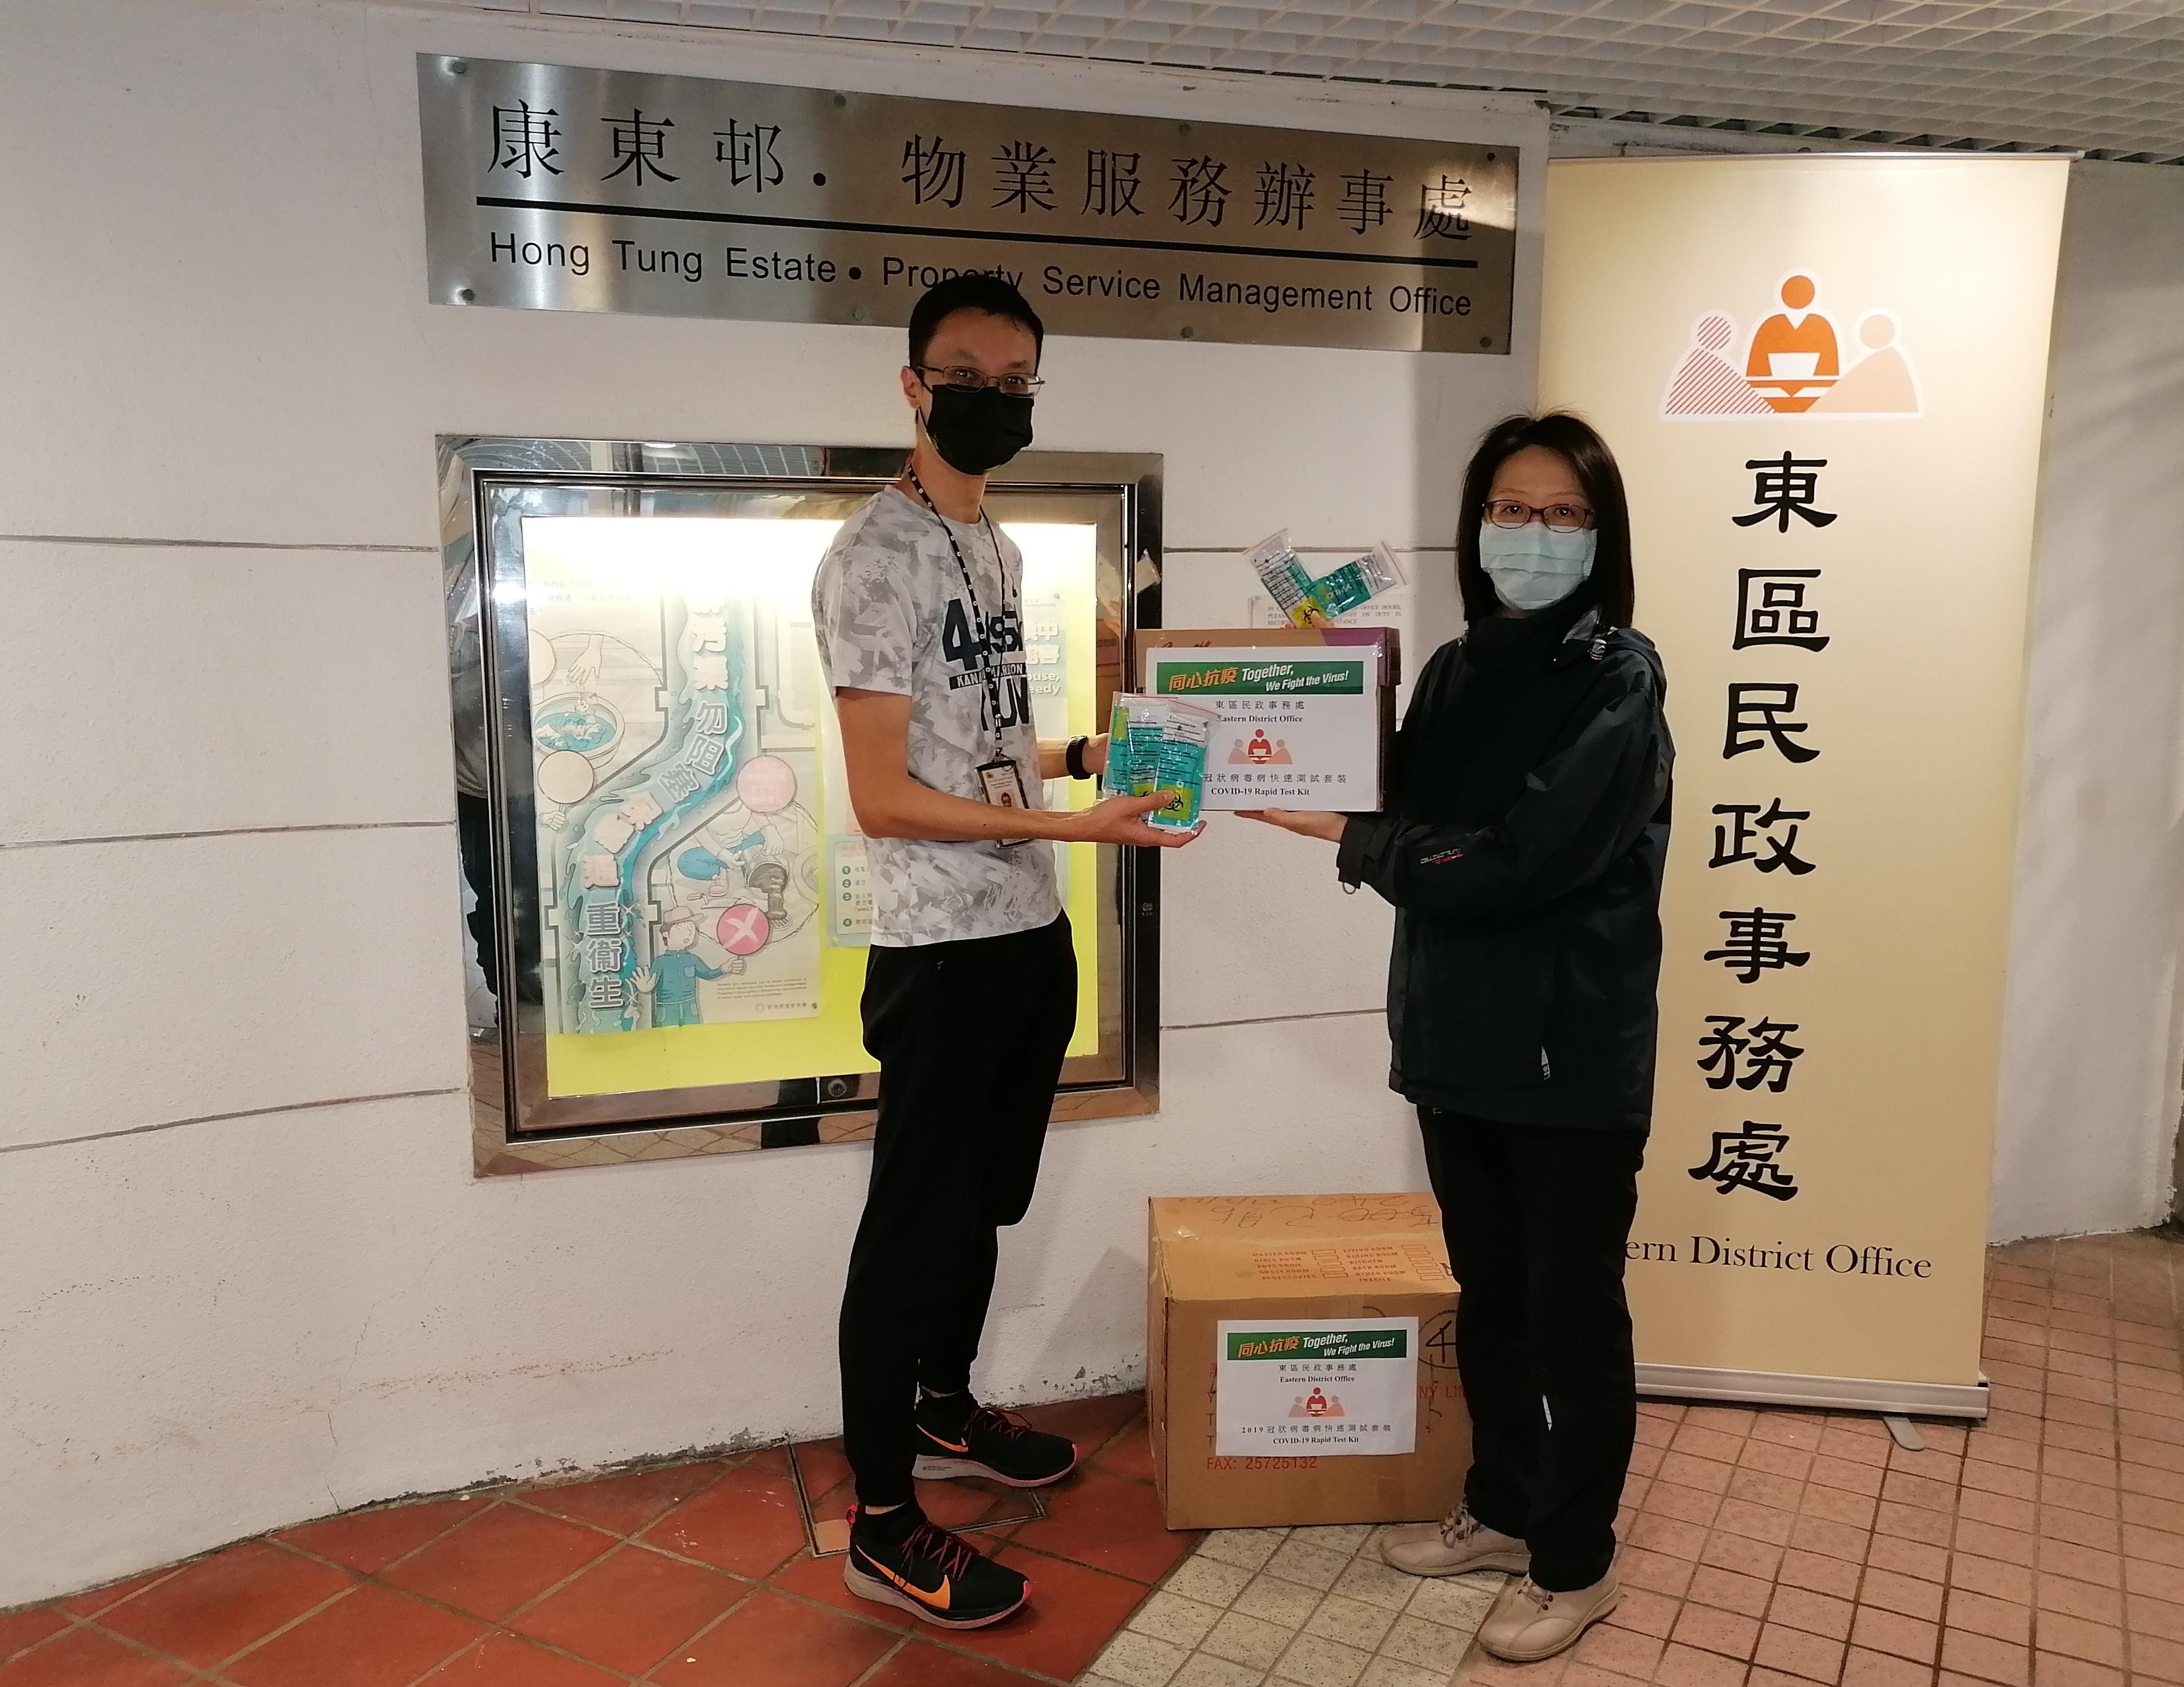 The Eastern District Office today (March 20) distributed COVID-19 rapid test kits to households, cleansing workers and property management staff living and working in Hong Tung Estate for voluntary testing through the Housing Department.